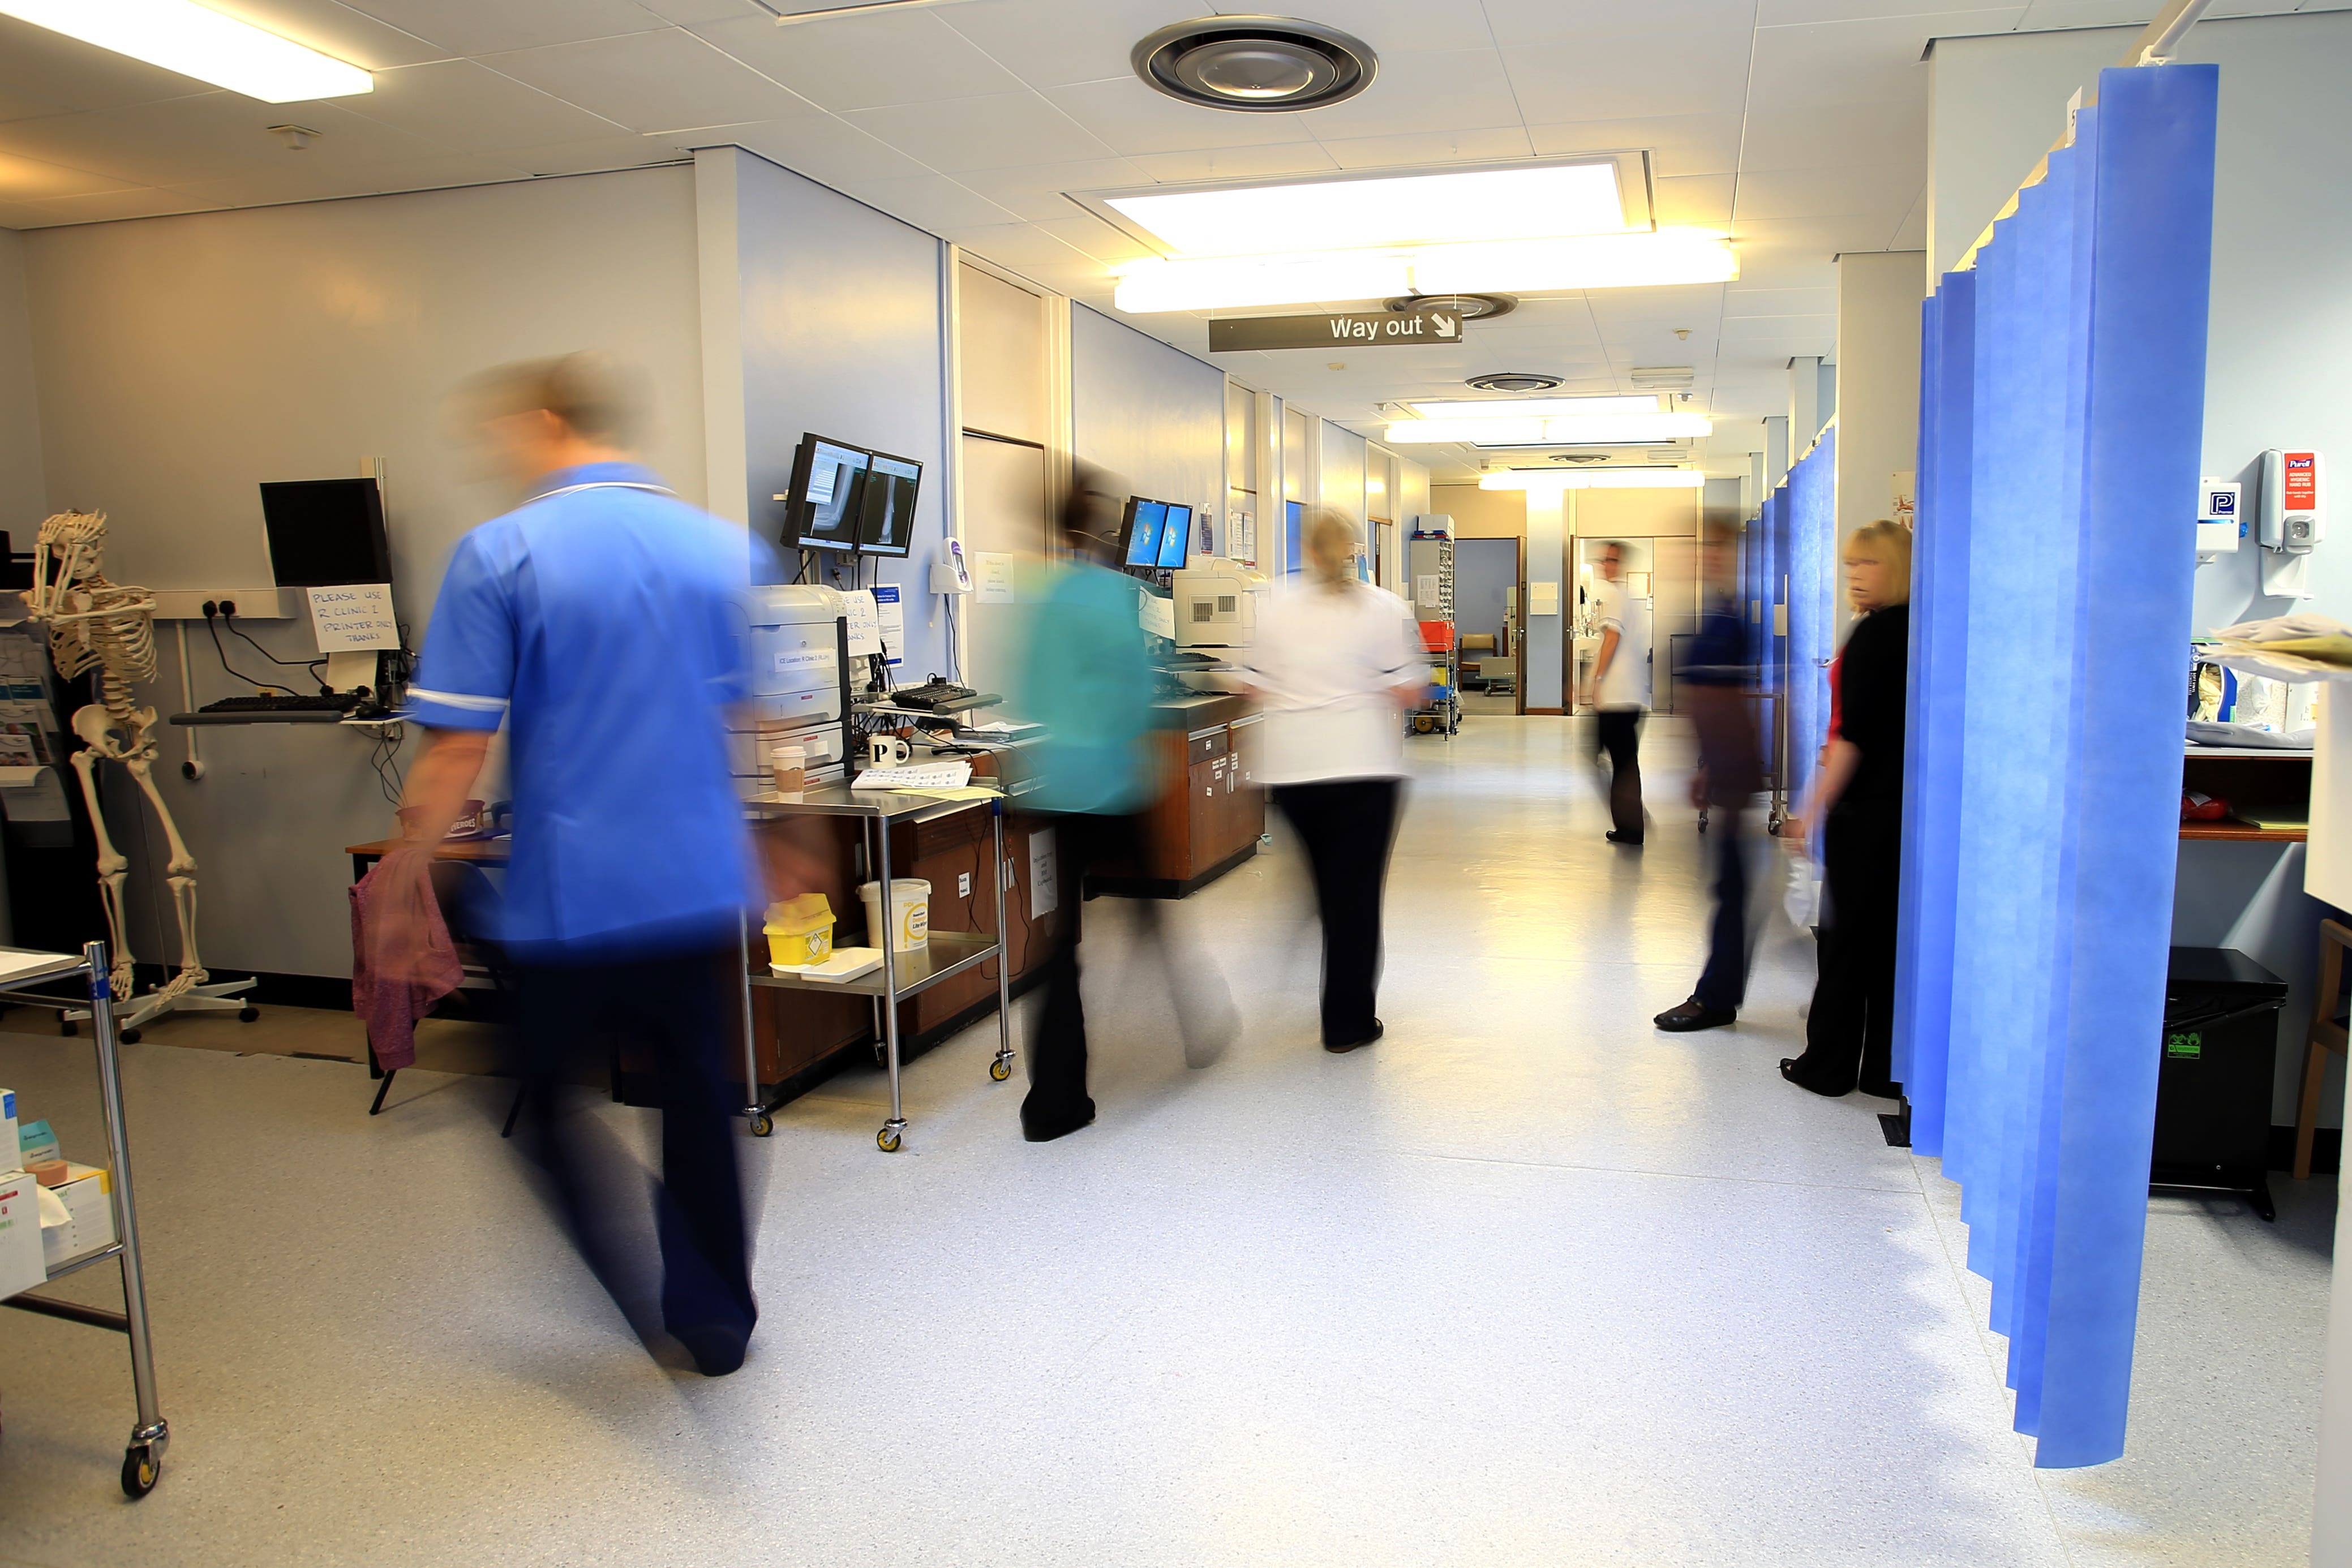 The NHS is working hard to meet a key cancer target but has a way to go, MPs have heard (Peter Byrne/PA)